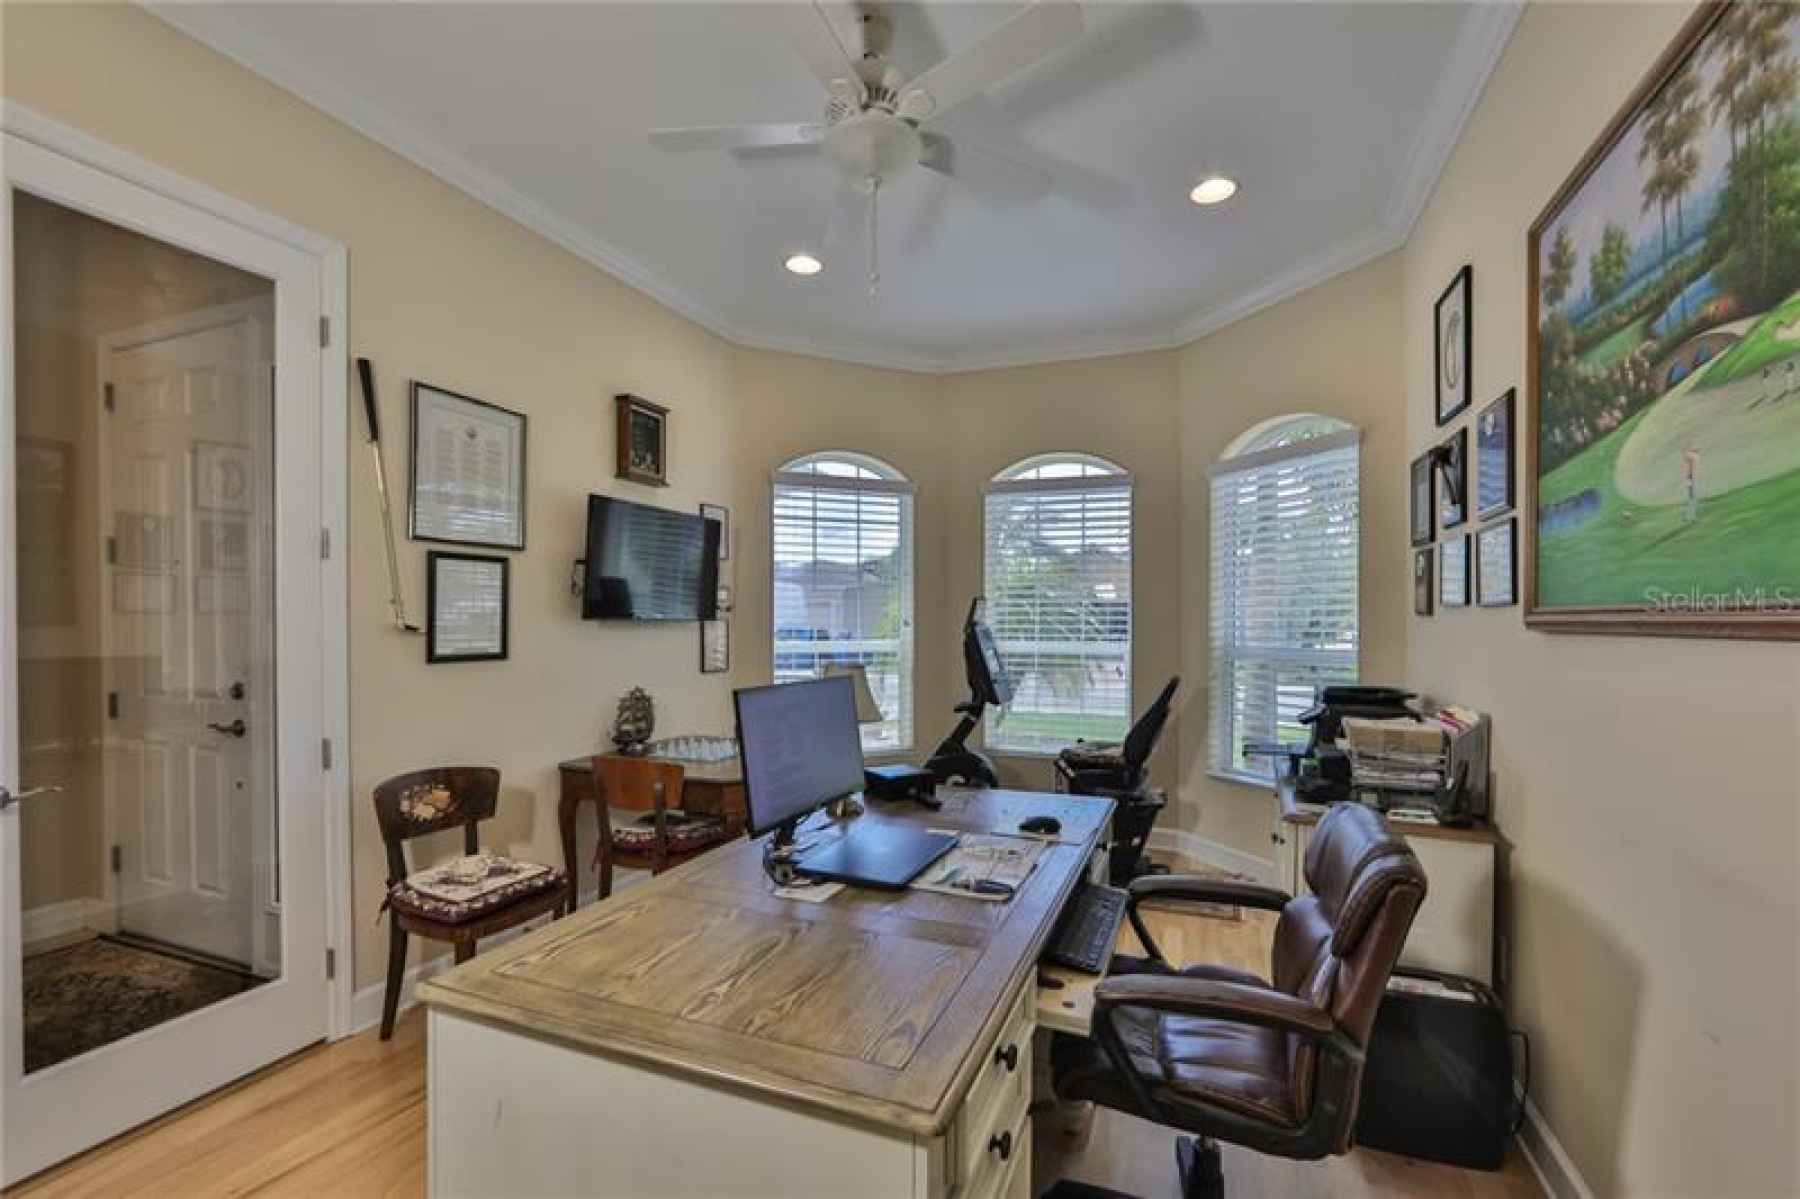 What an office!  Large glass french doors, crown molding and large windows make this space enjoyable